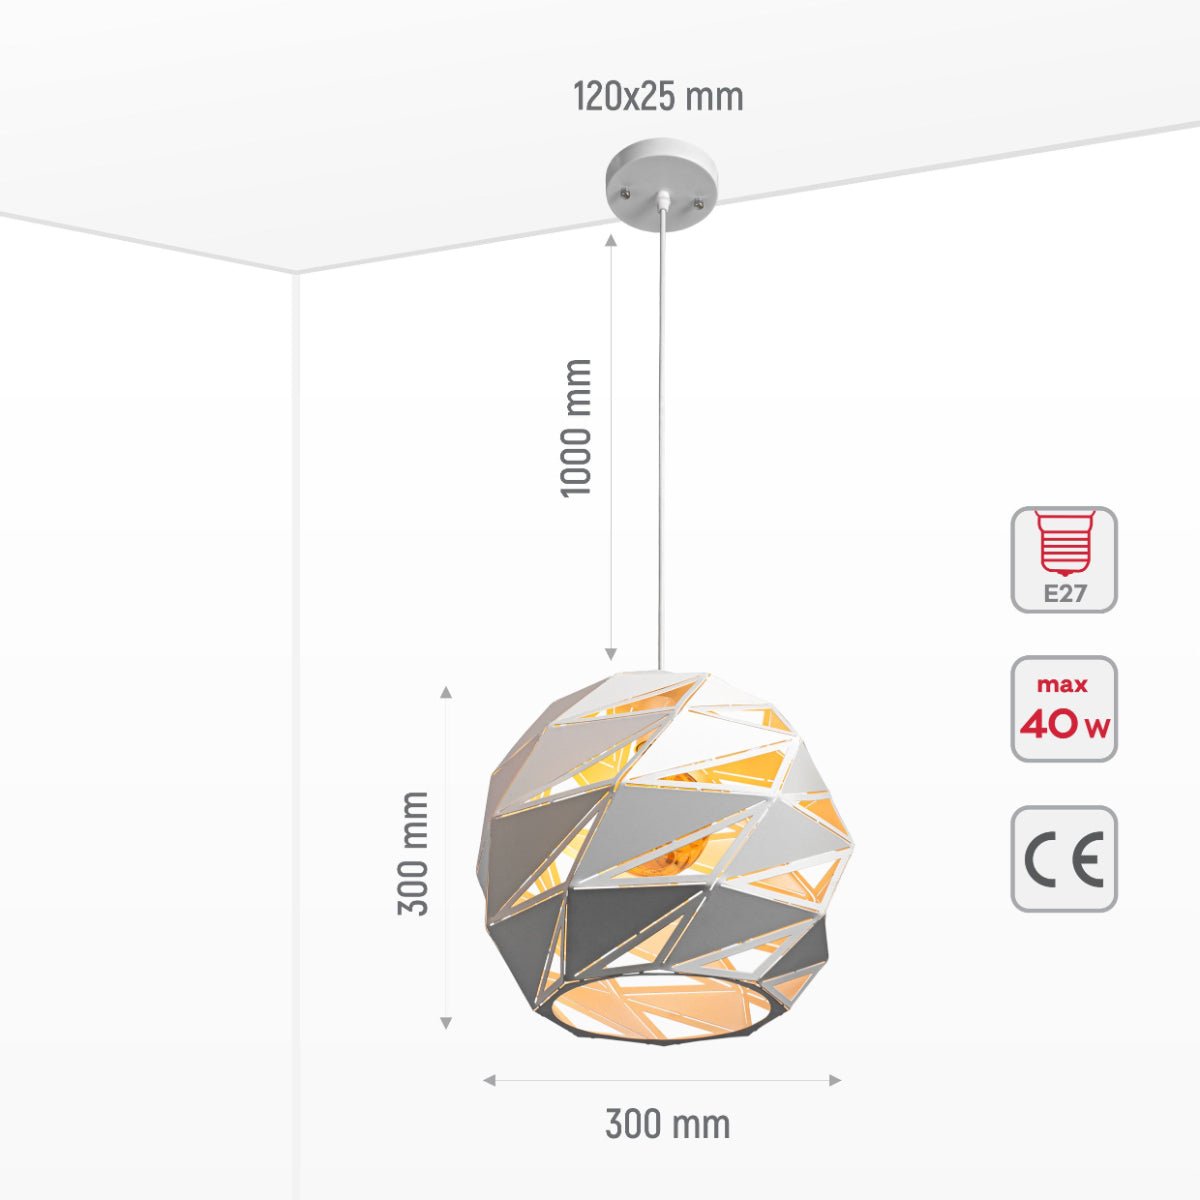 Size and specs of White Metal Globe Polyhedral Pendant Ceiling Light with E27 | TEKLED 150-18270